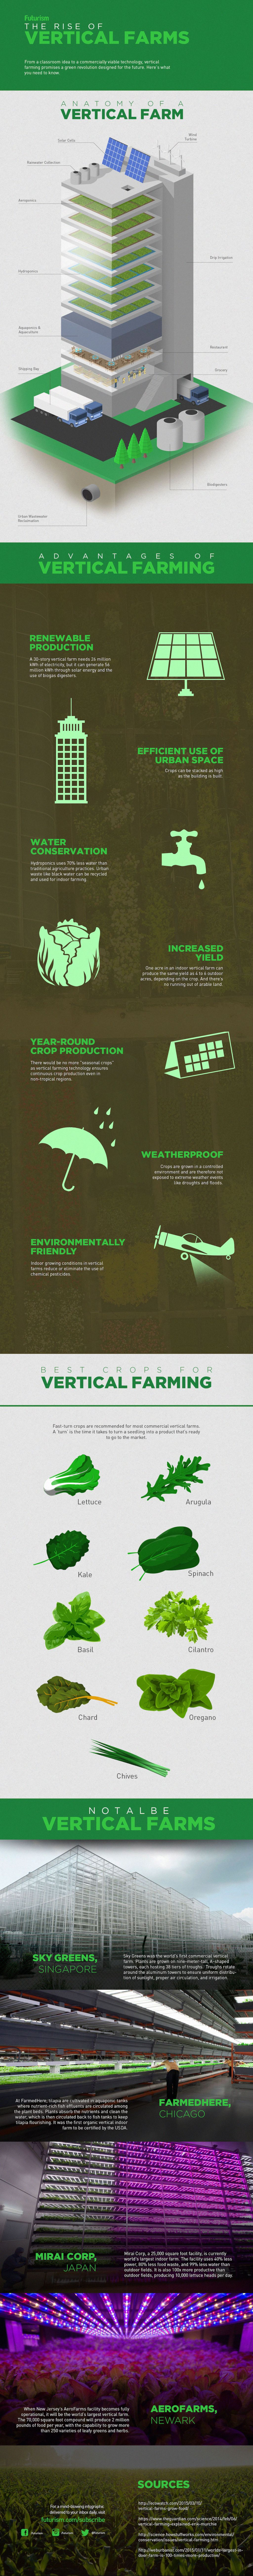 Rise-of-Vertical-Farms_v4-1